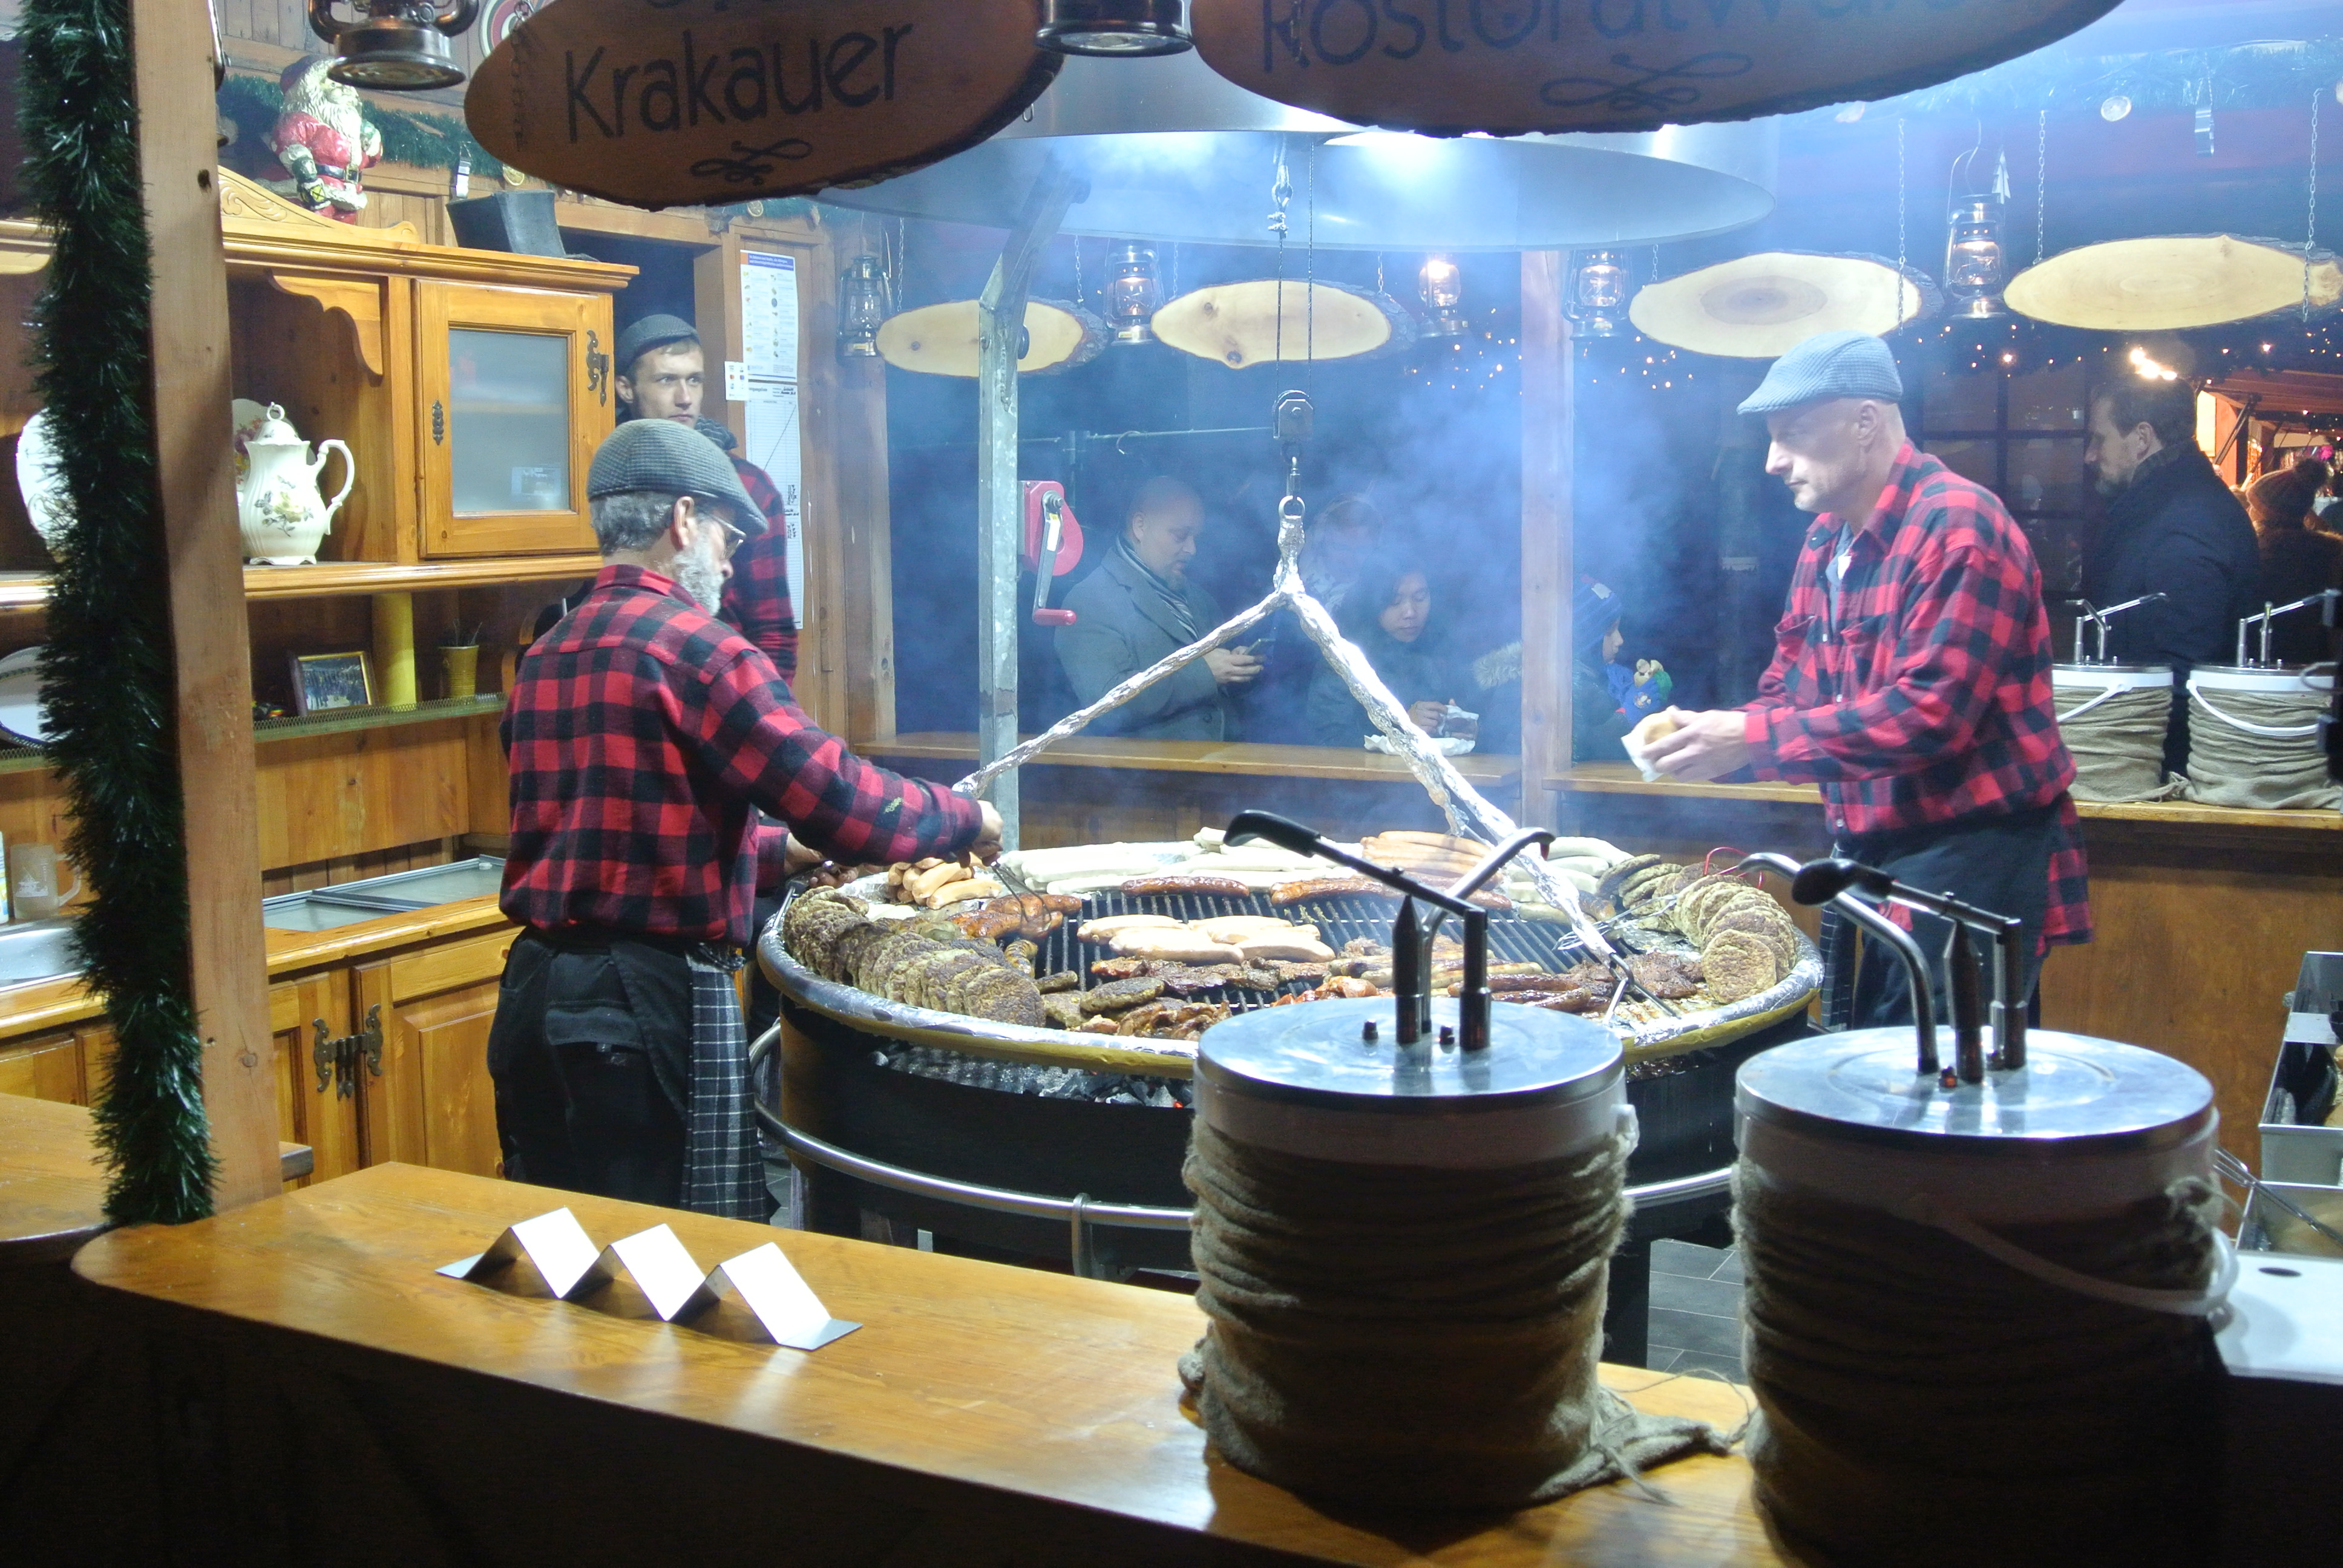 Cooking sausages at a German Christmas Market - photo by Juliamaud